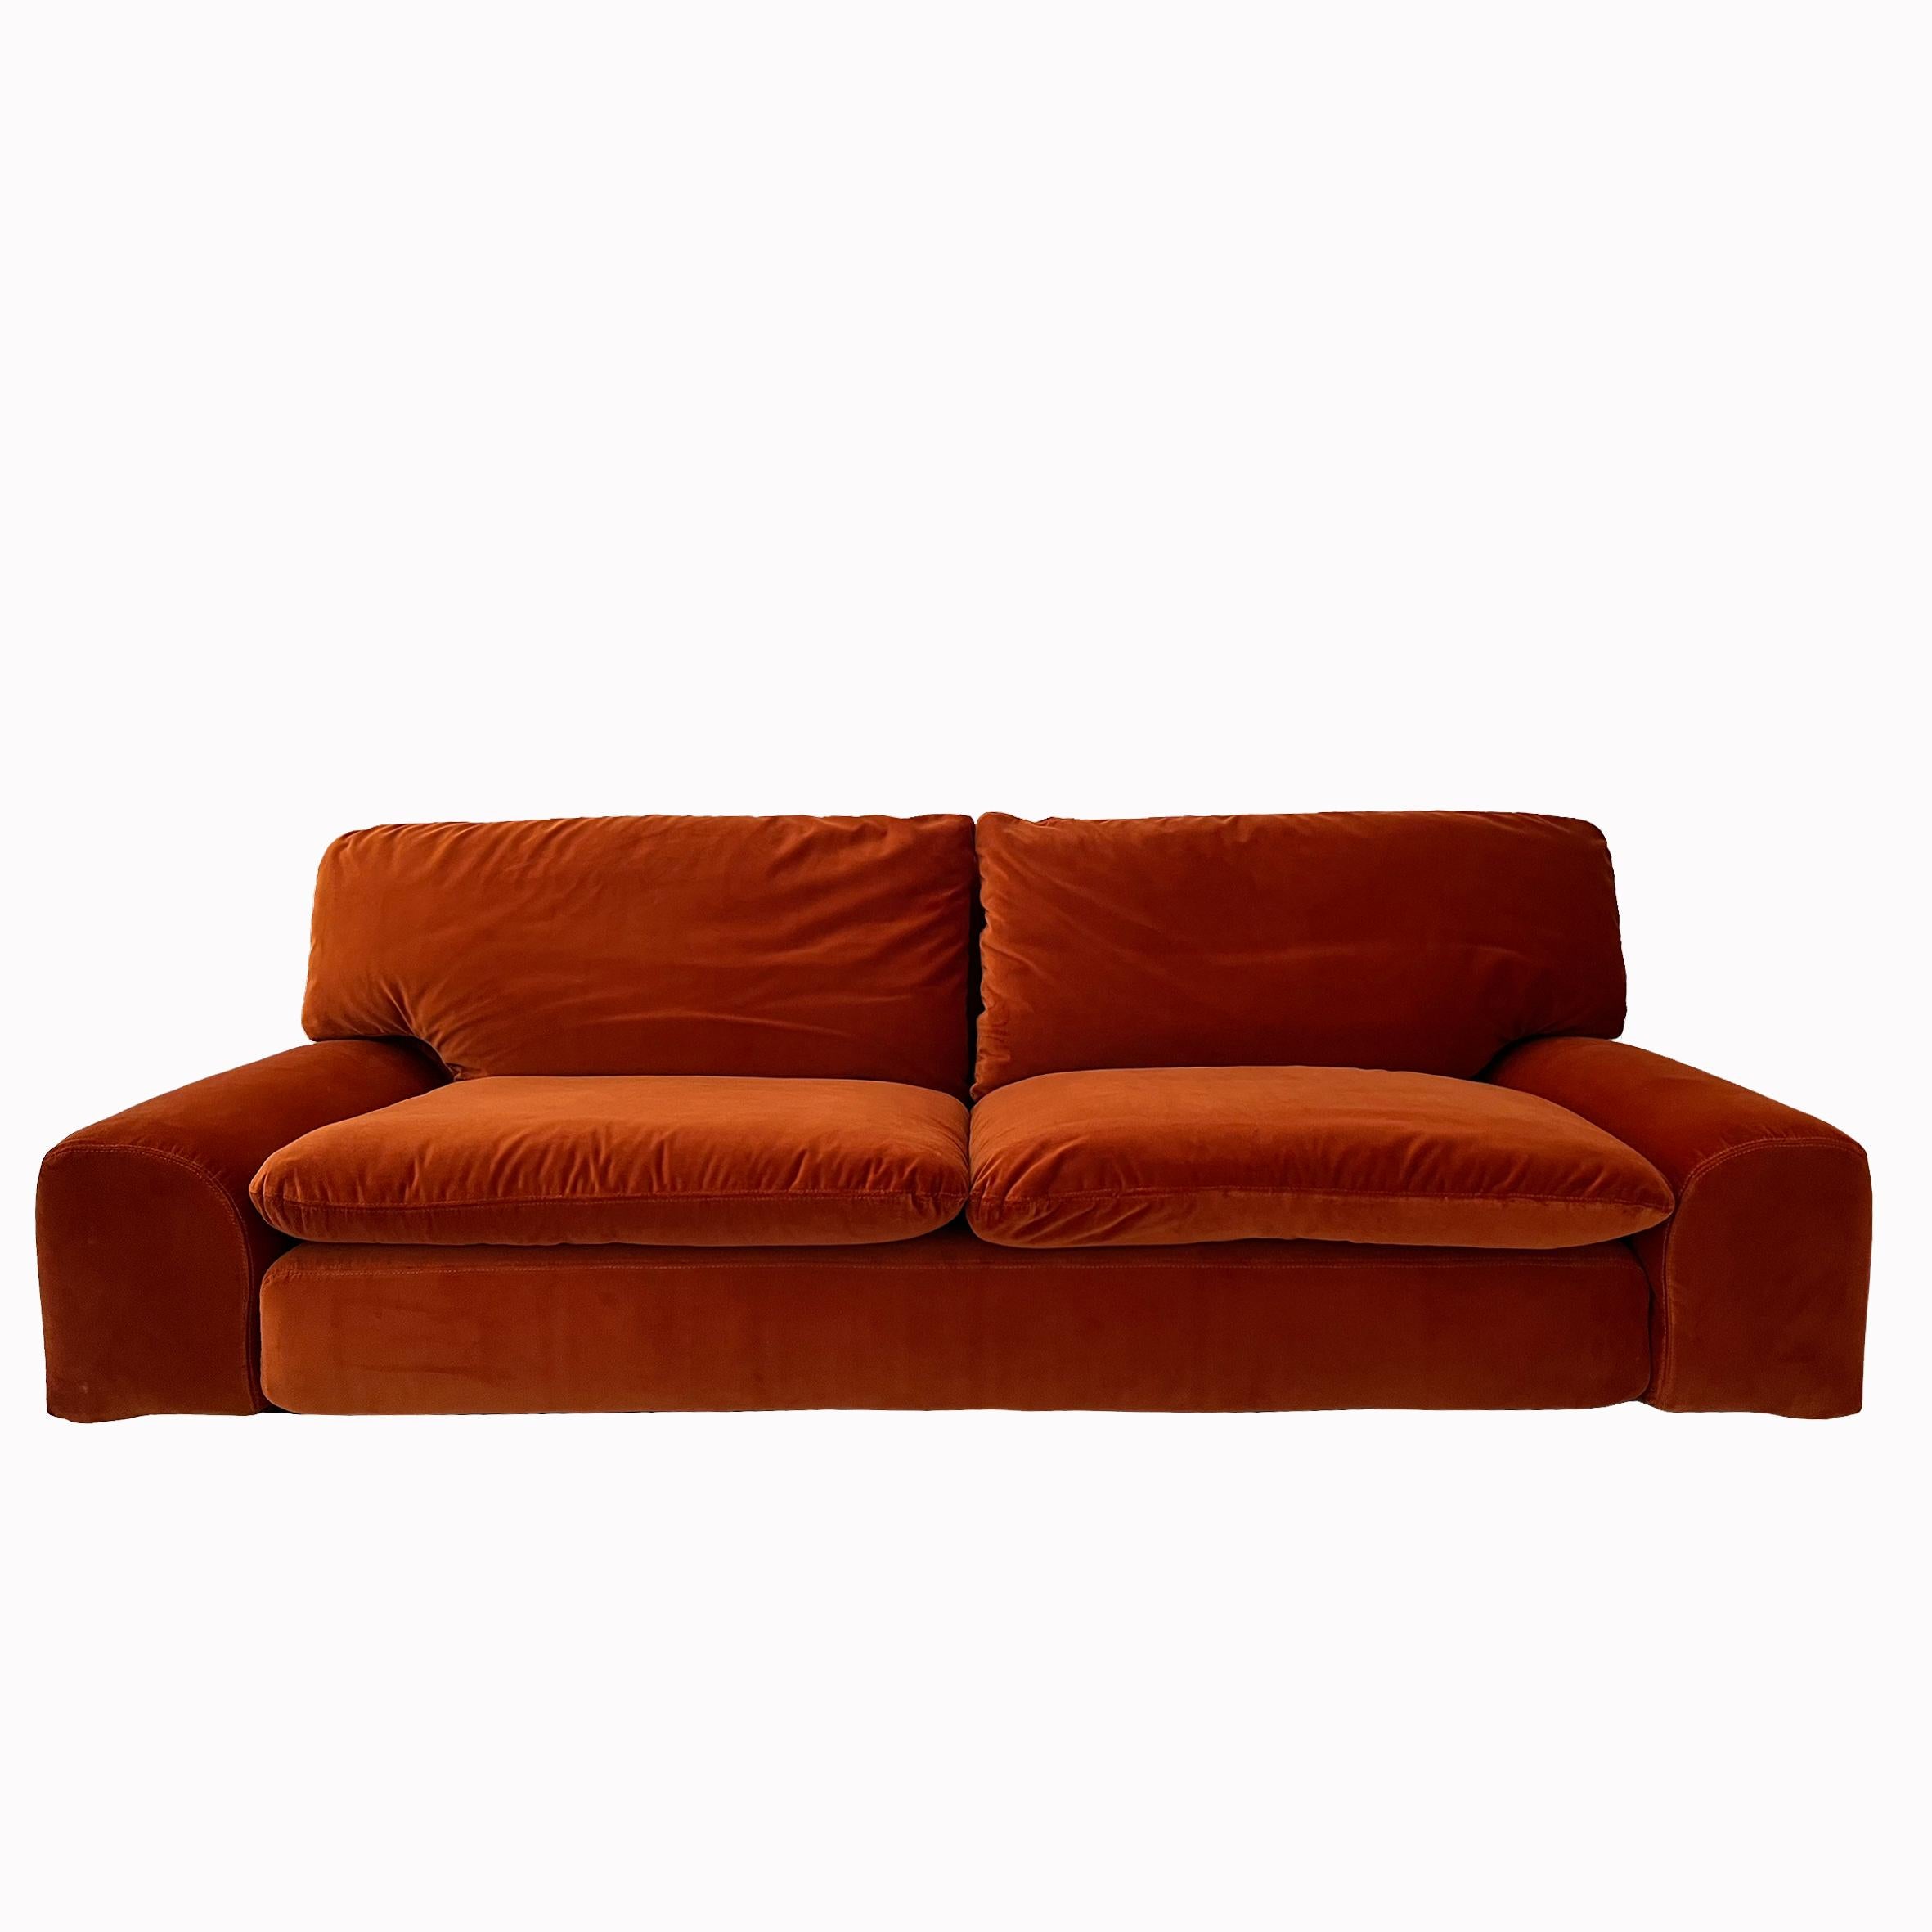 Cini Boeri (1924-2020)

Bengodi

A rectangular three-seater sofa covered with velvet upholstery, the seat and back each with two cushions on six feet.
Original edition by Arflex.
Italy.
Circa 1974.

Note
Newly upholstered with a Pierre Frey velvet